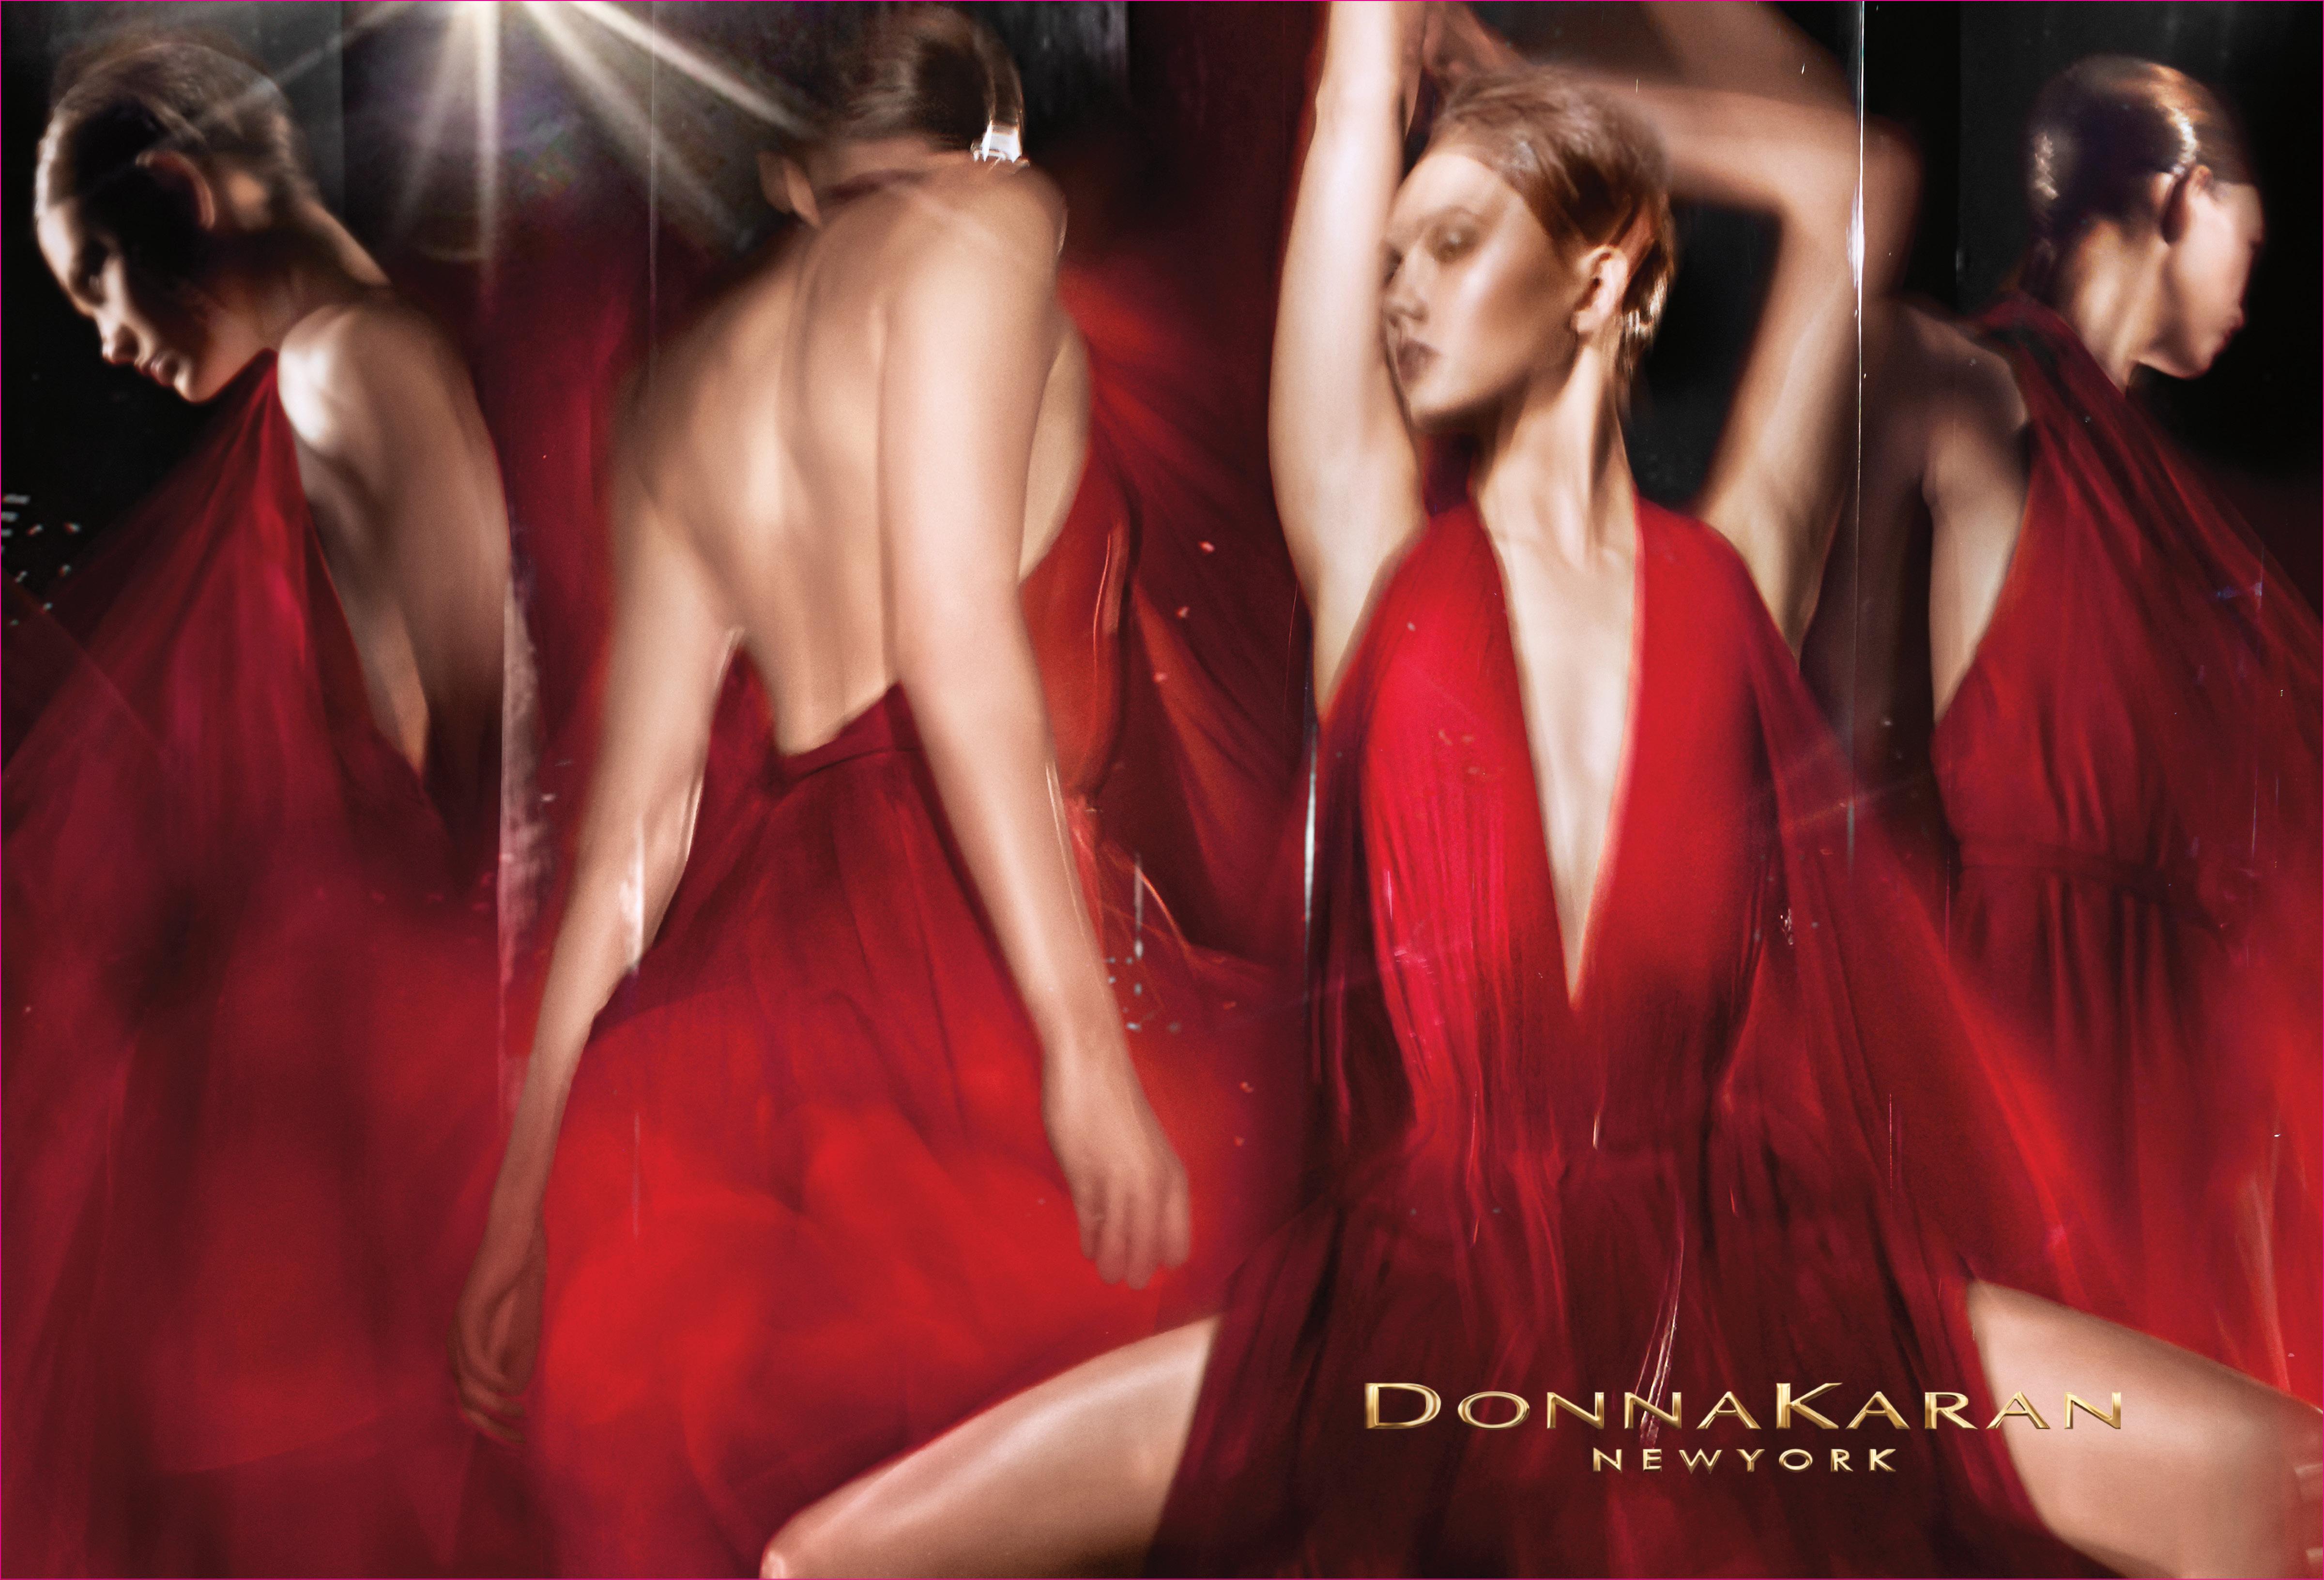 Donna Karan celebrates today the 30th anniversary of her brand